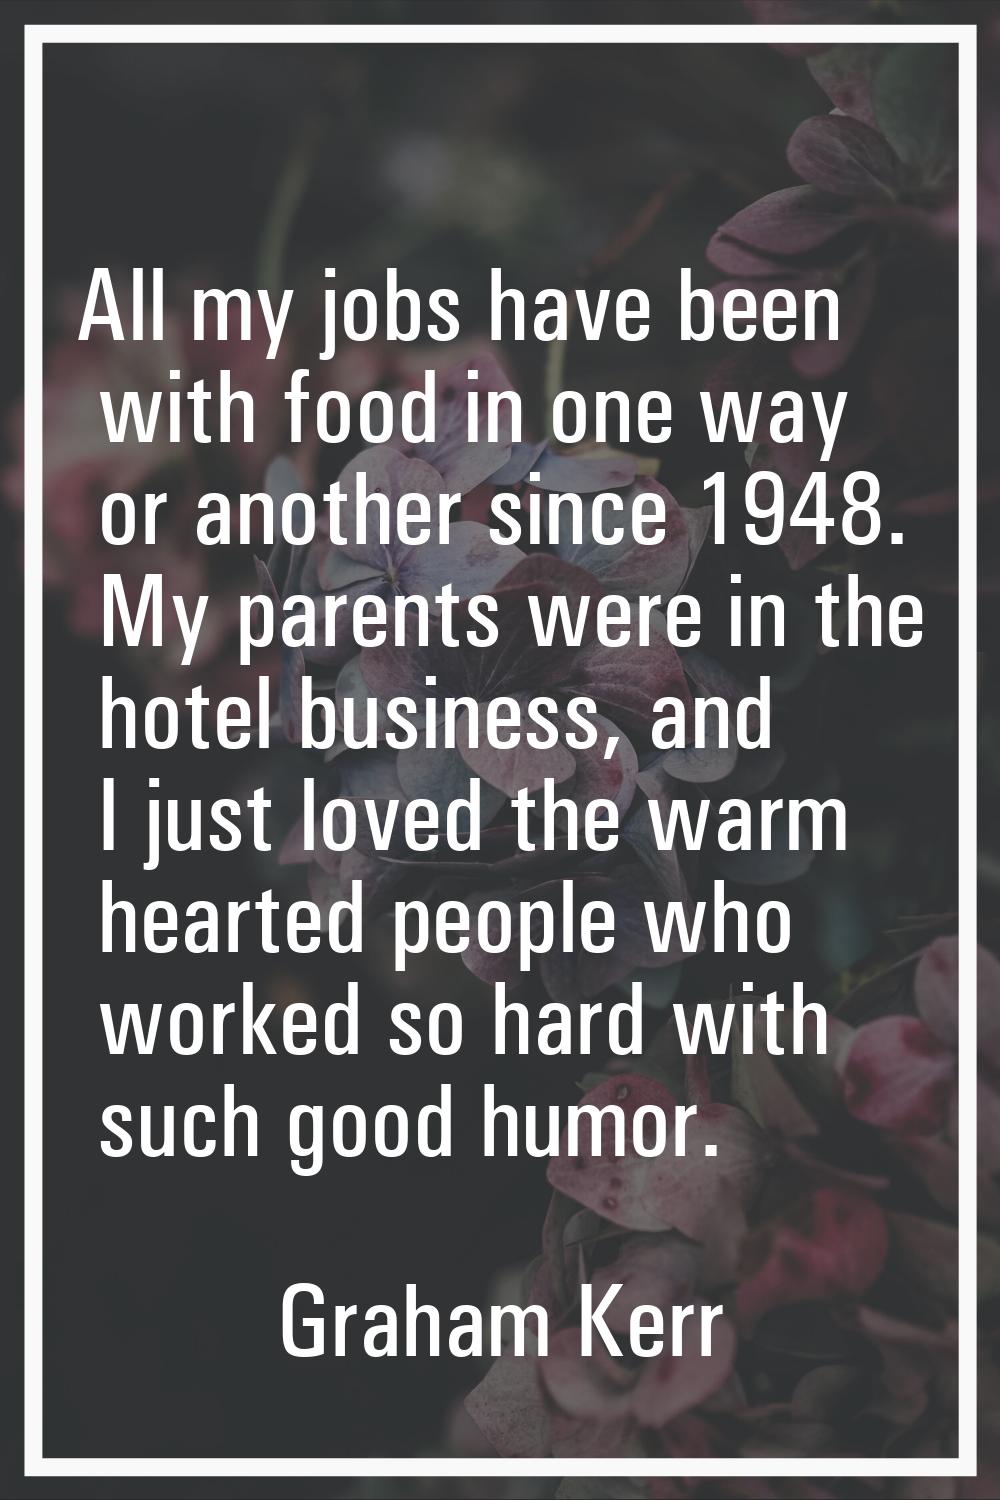 All my jobs have been with food in one way or another since 1948. My parents were in the hotel busi